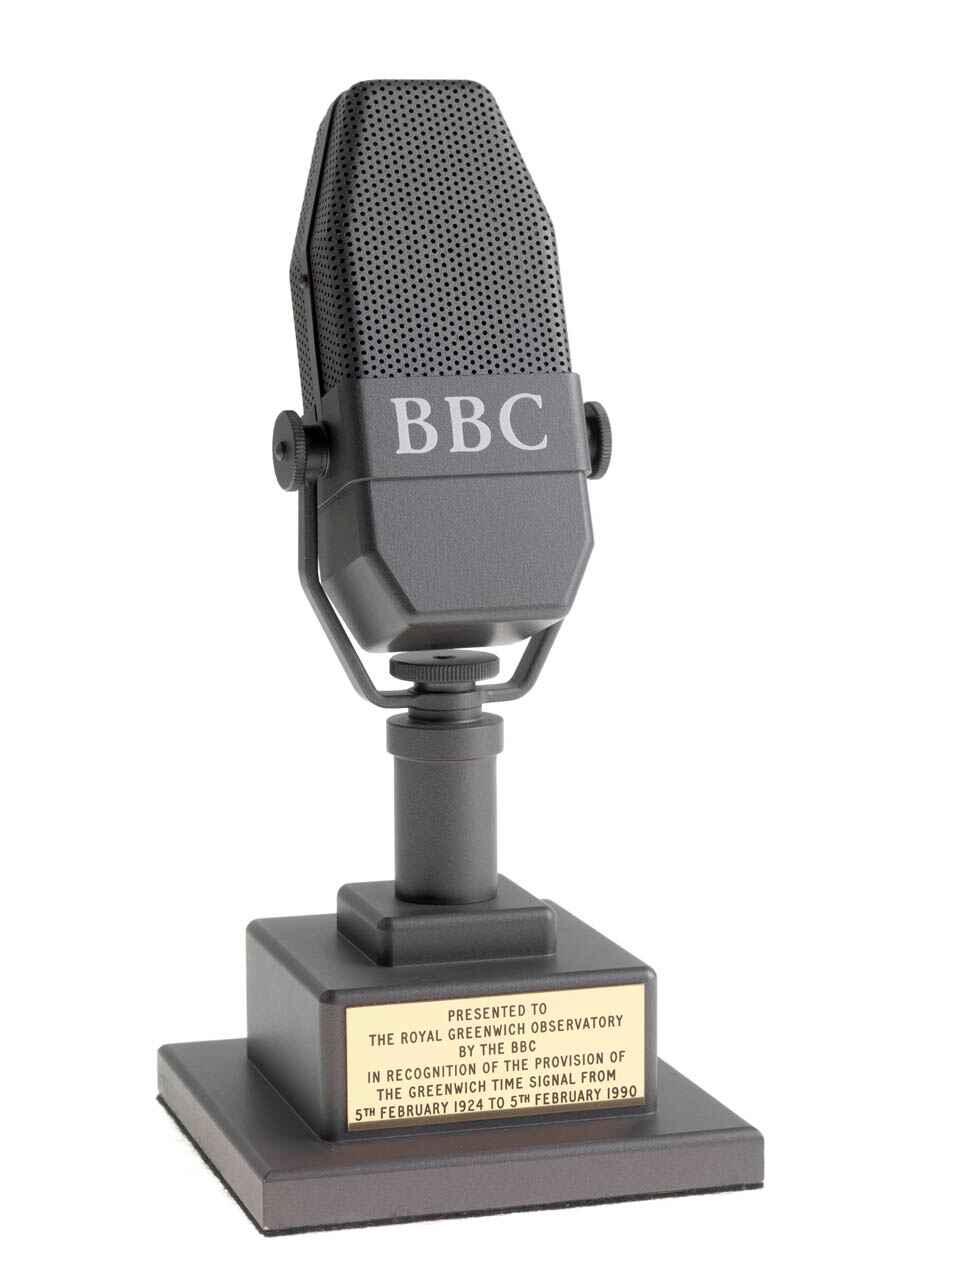 A small microphone with BBC written on it, on top of a small platform with a plaque